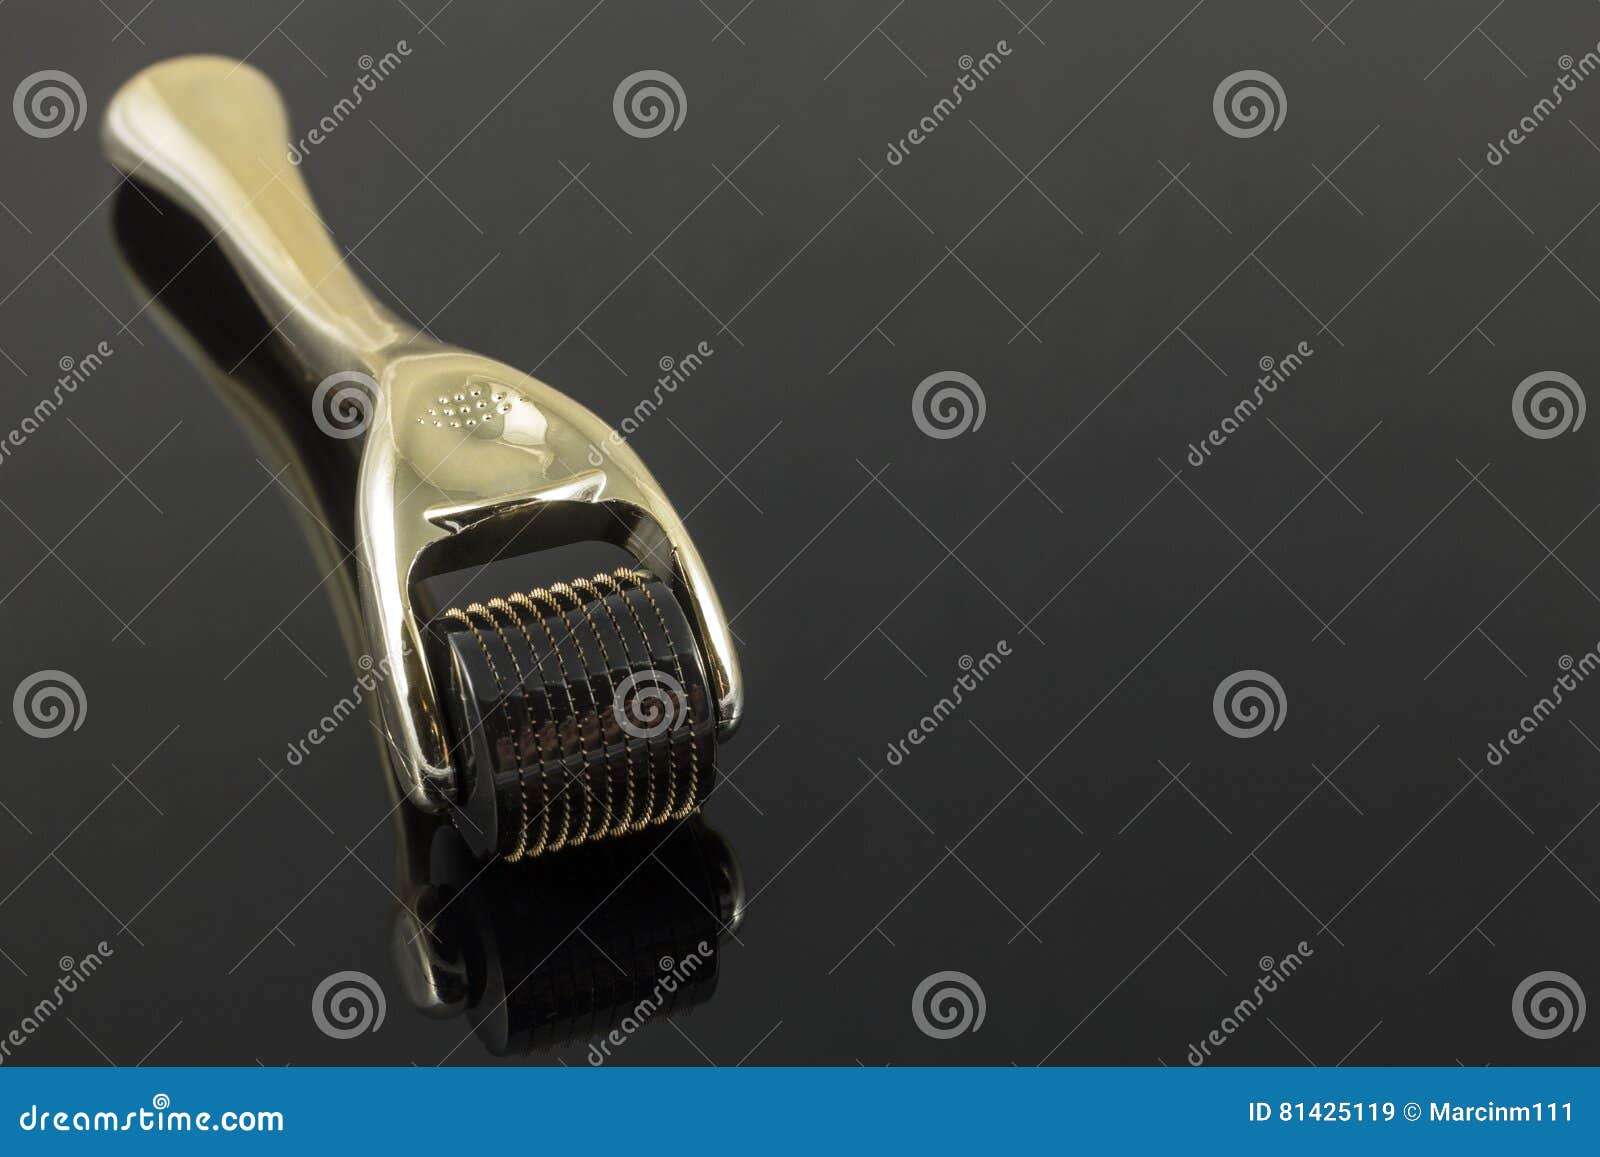 golden derma roller for medical micro needling therapy.